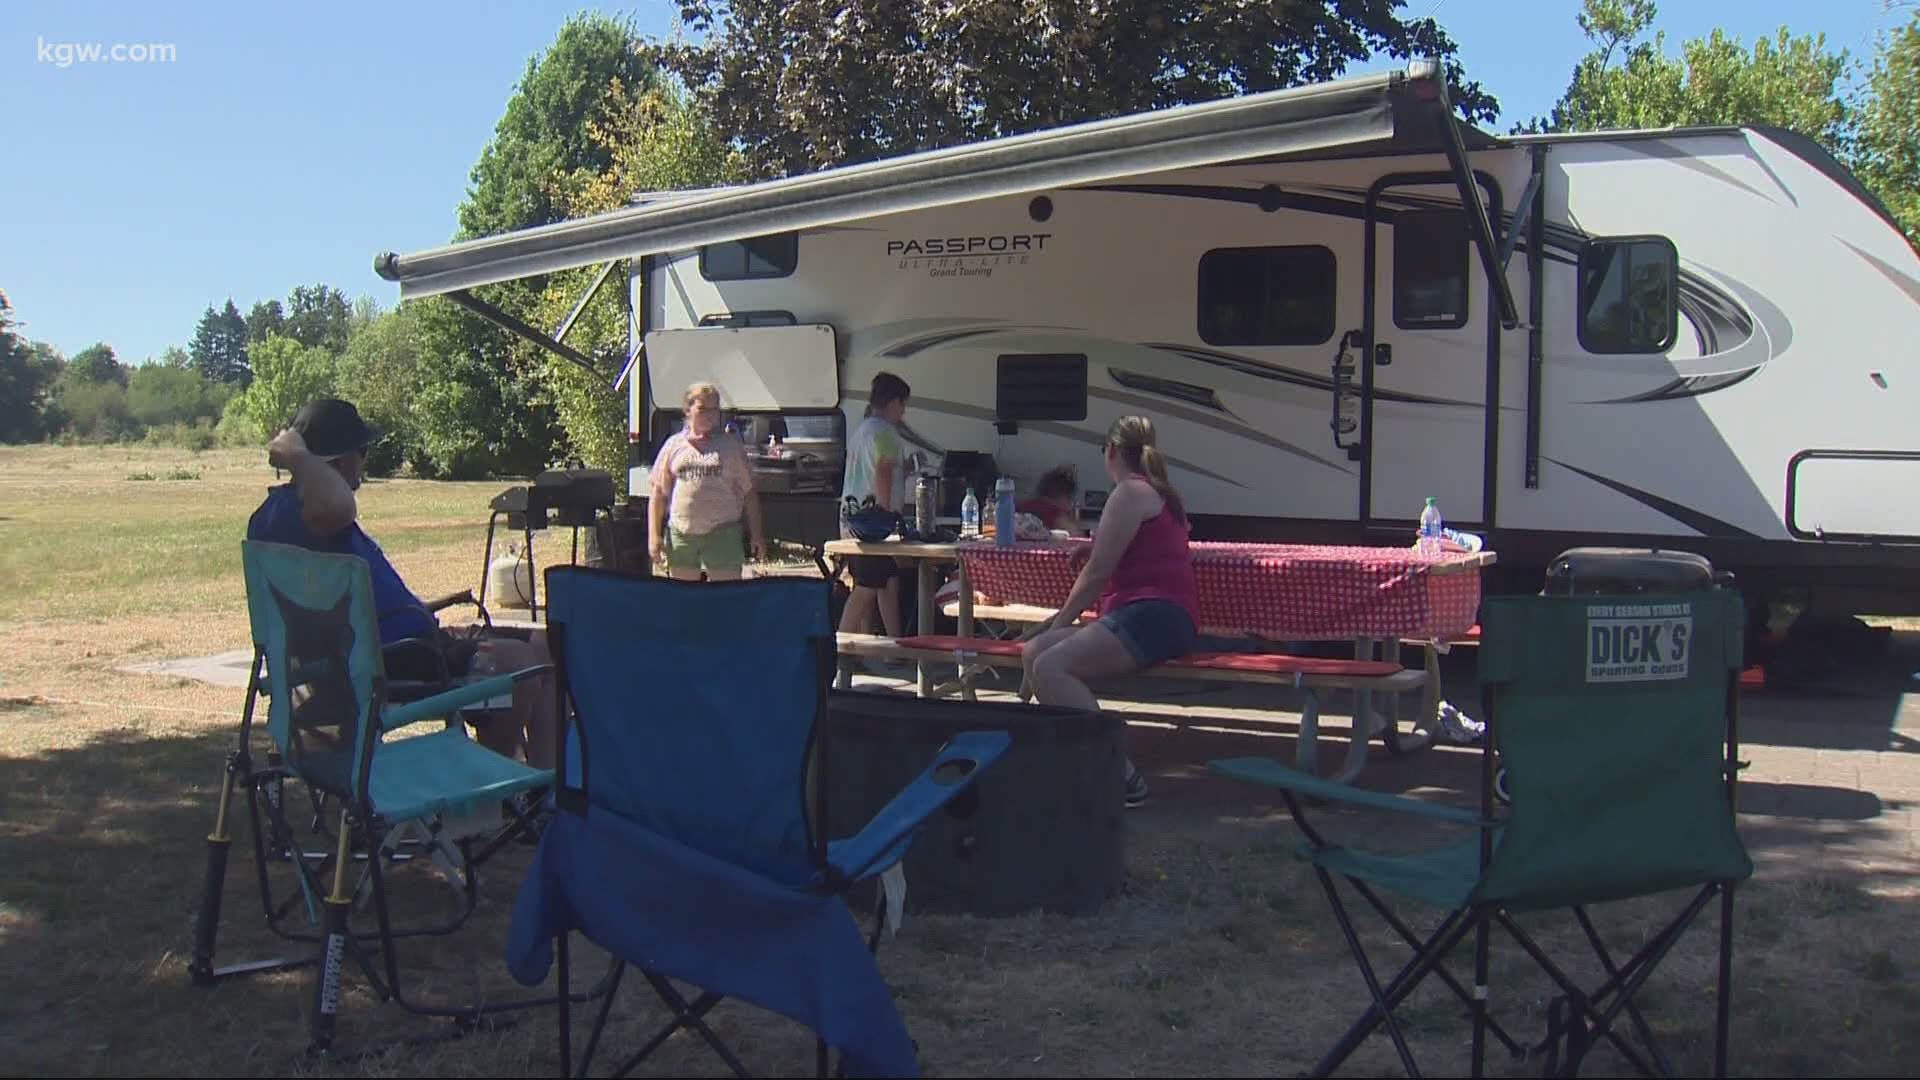 Many campsites have been booked for months as people stay close to home during the pandemic. Joe Raineri reports on how are they are keeping everyone safe.